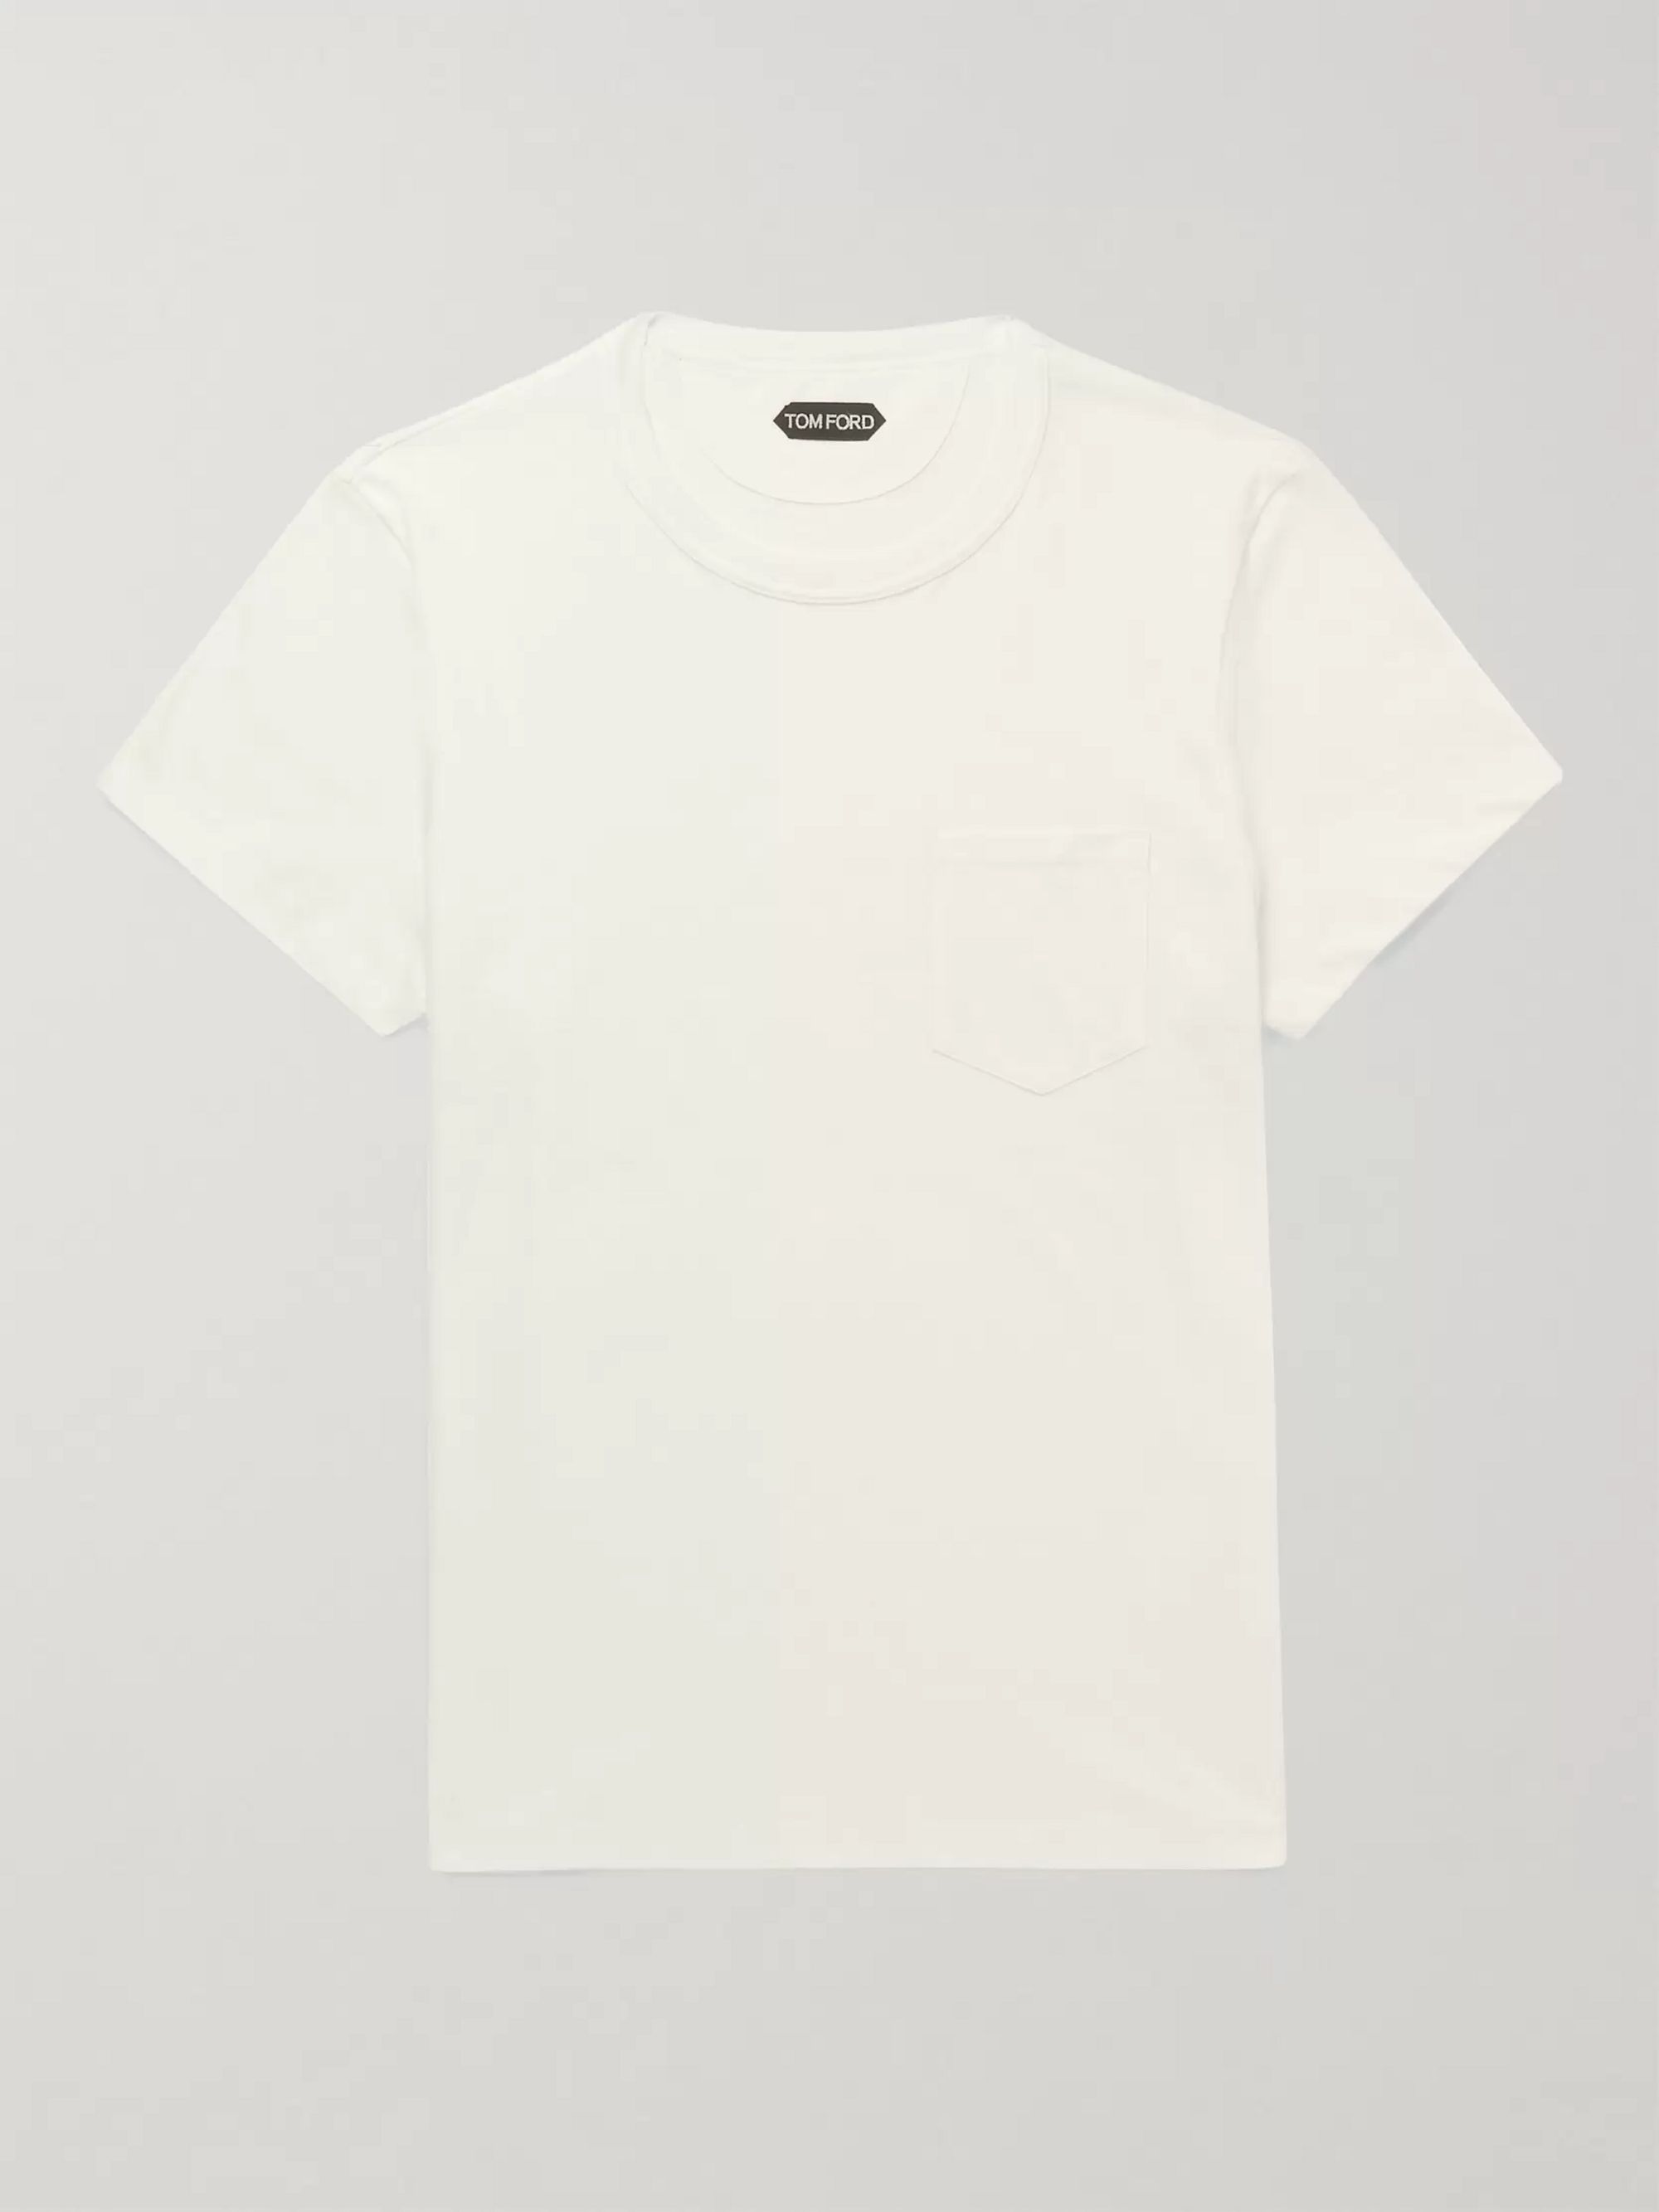 White Cotton-Jersey T-Shirt | TOM FORD 